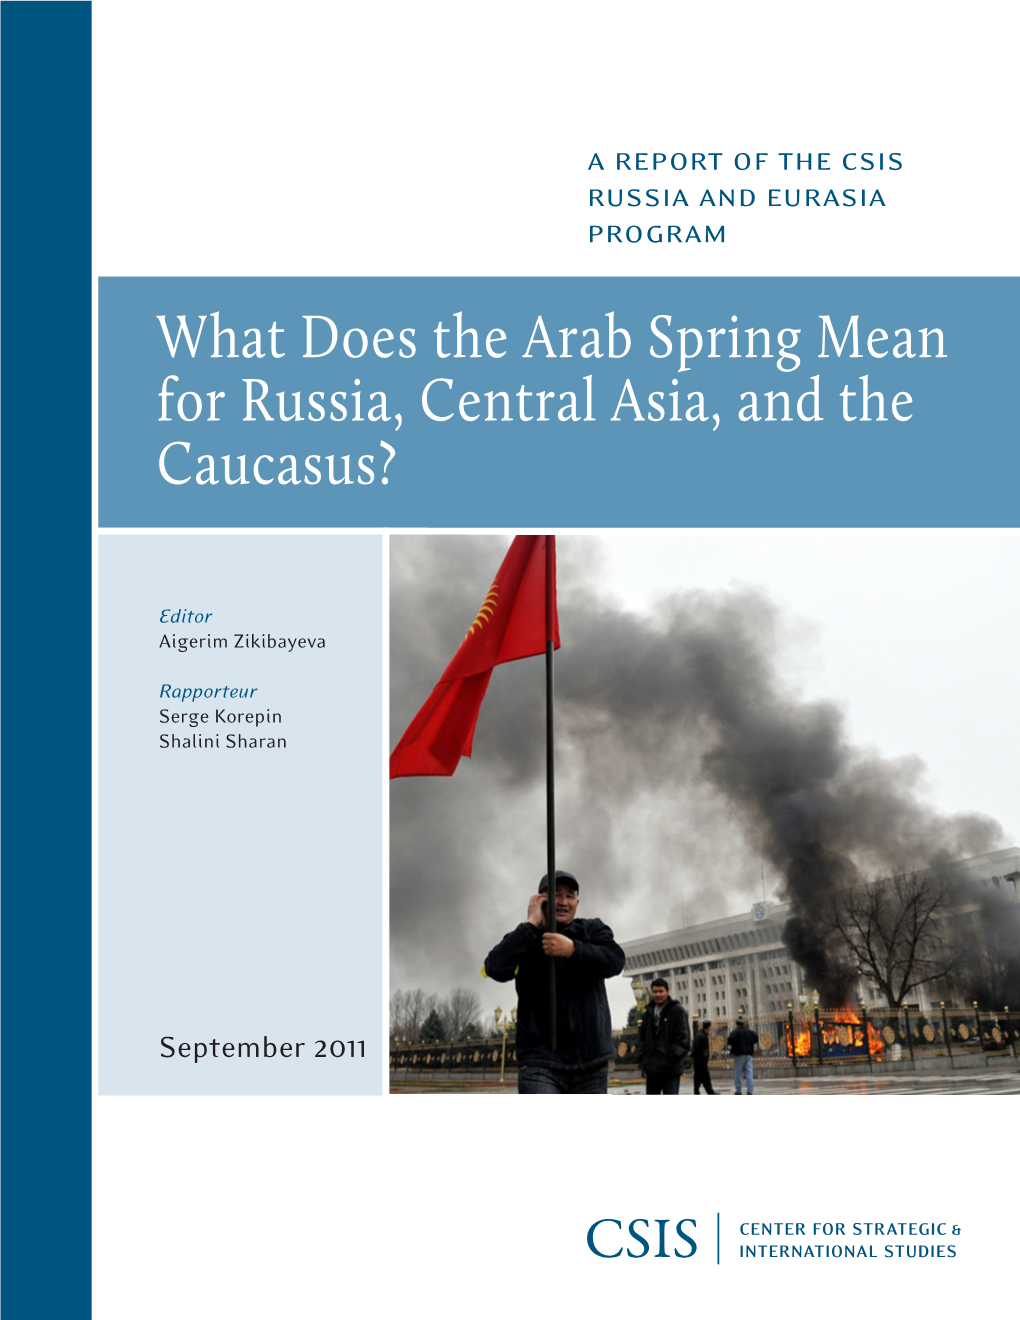 What Does the Arab Spring Mean for Russia, Central Asia, and the Caucasus?